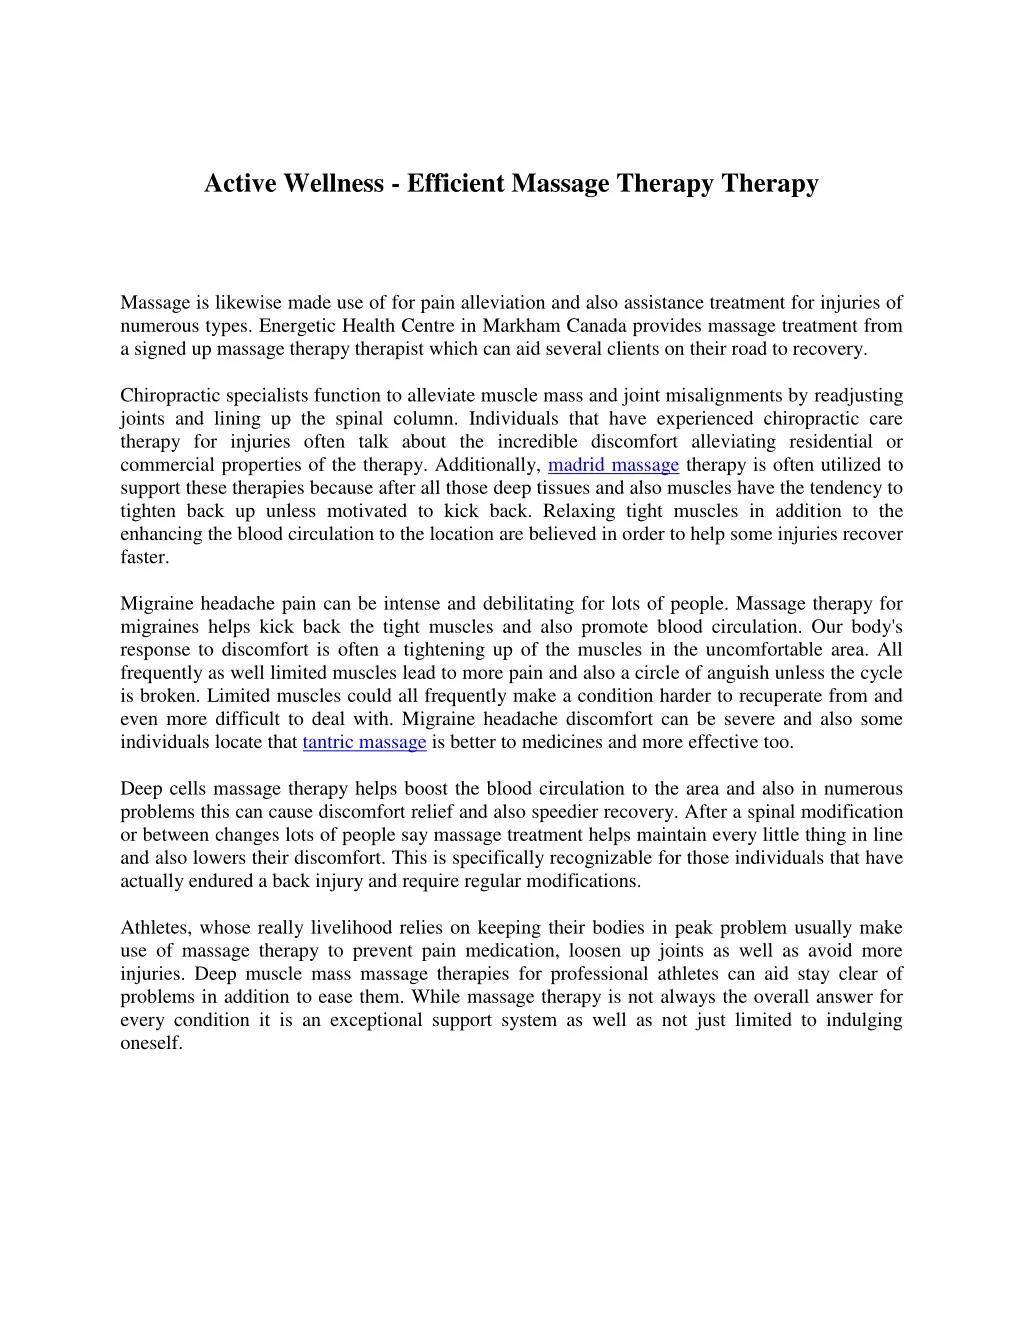 active wellness efficient massage therapy therapy